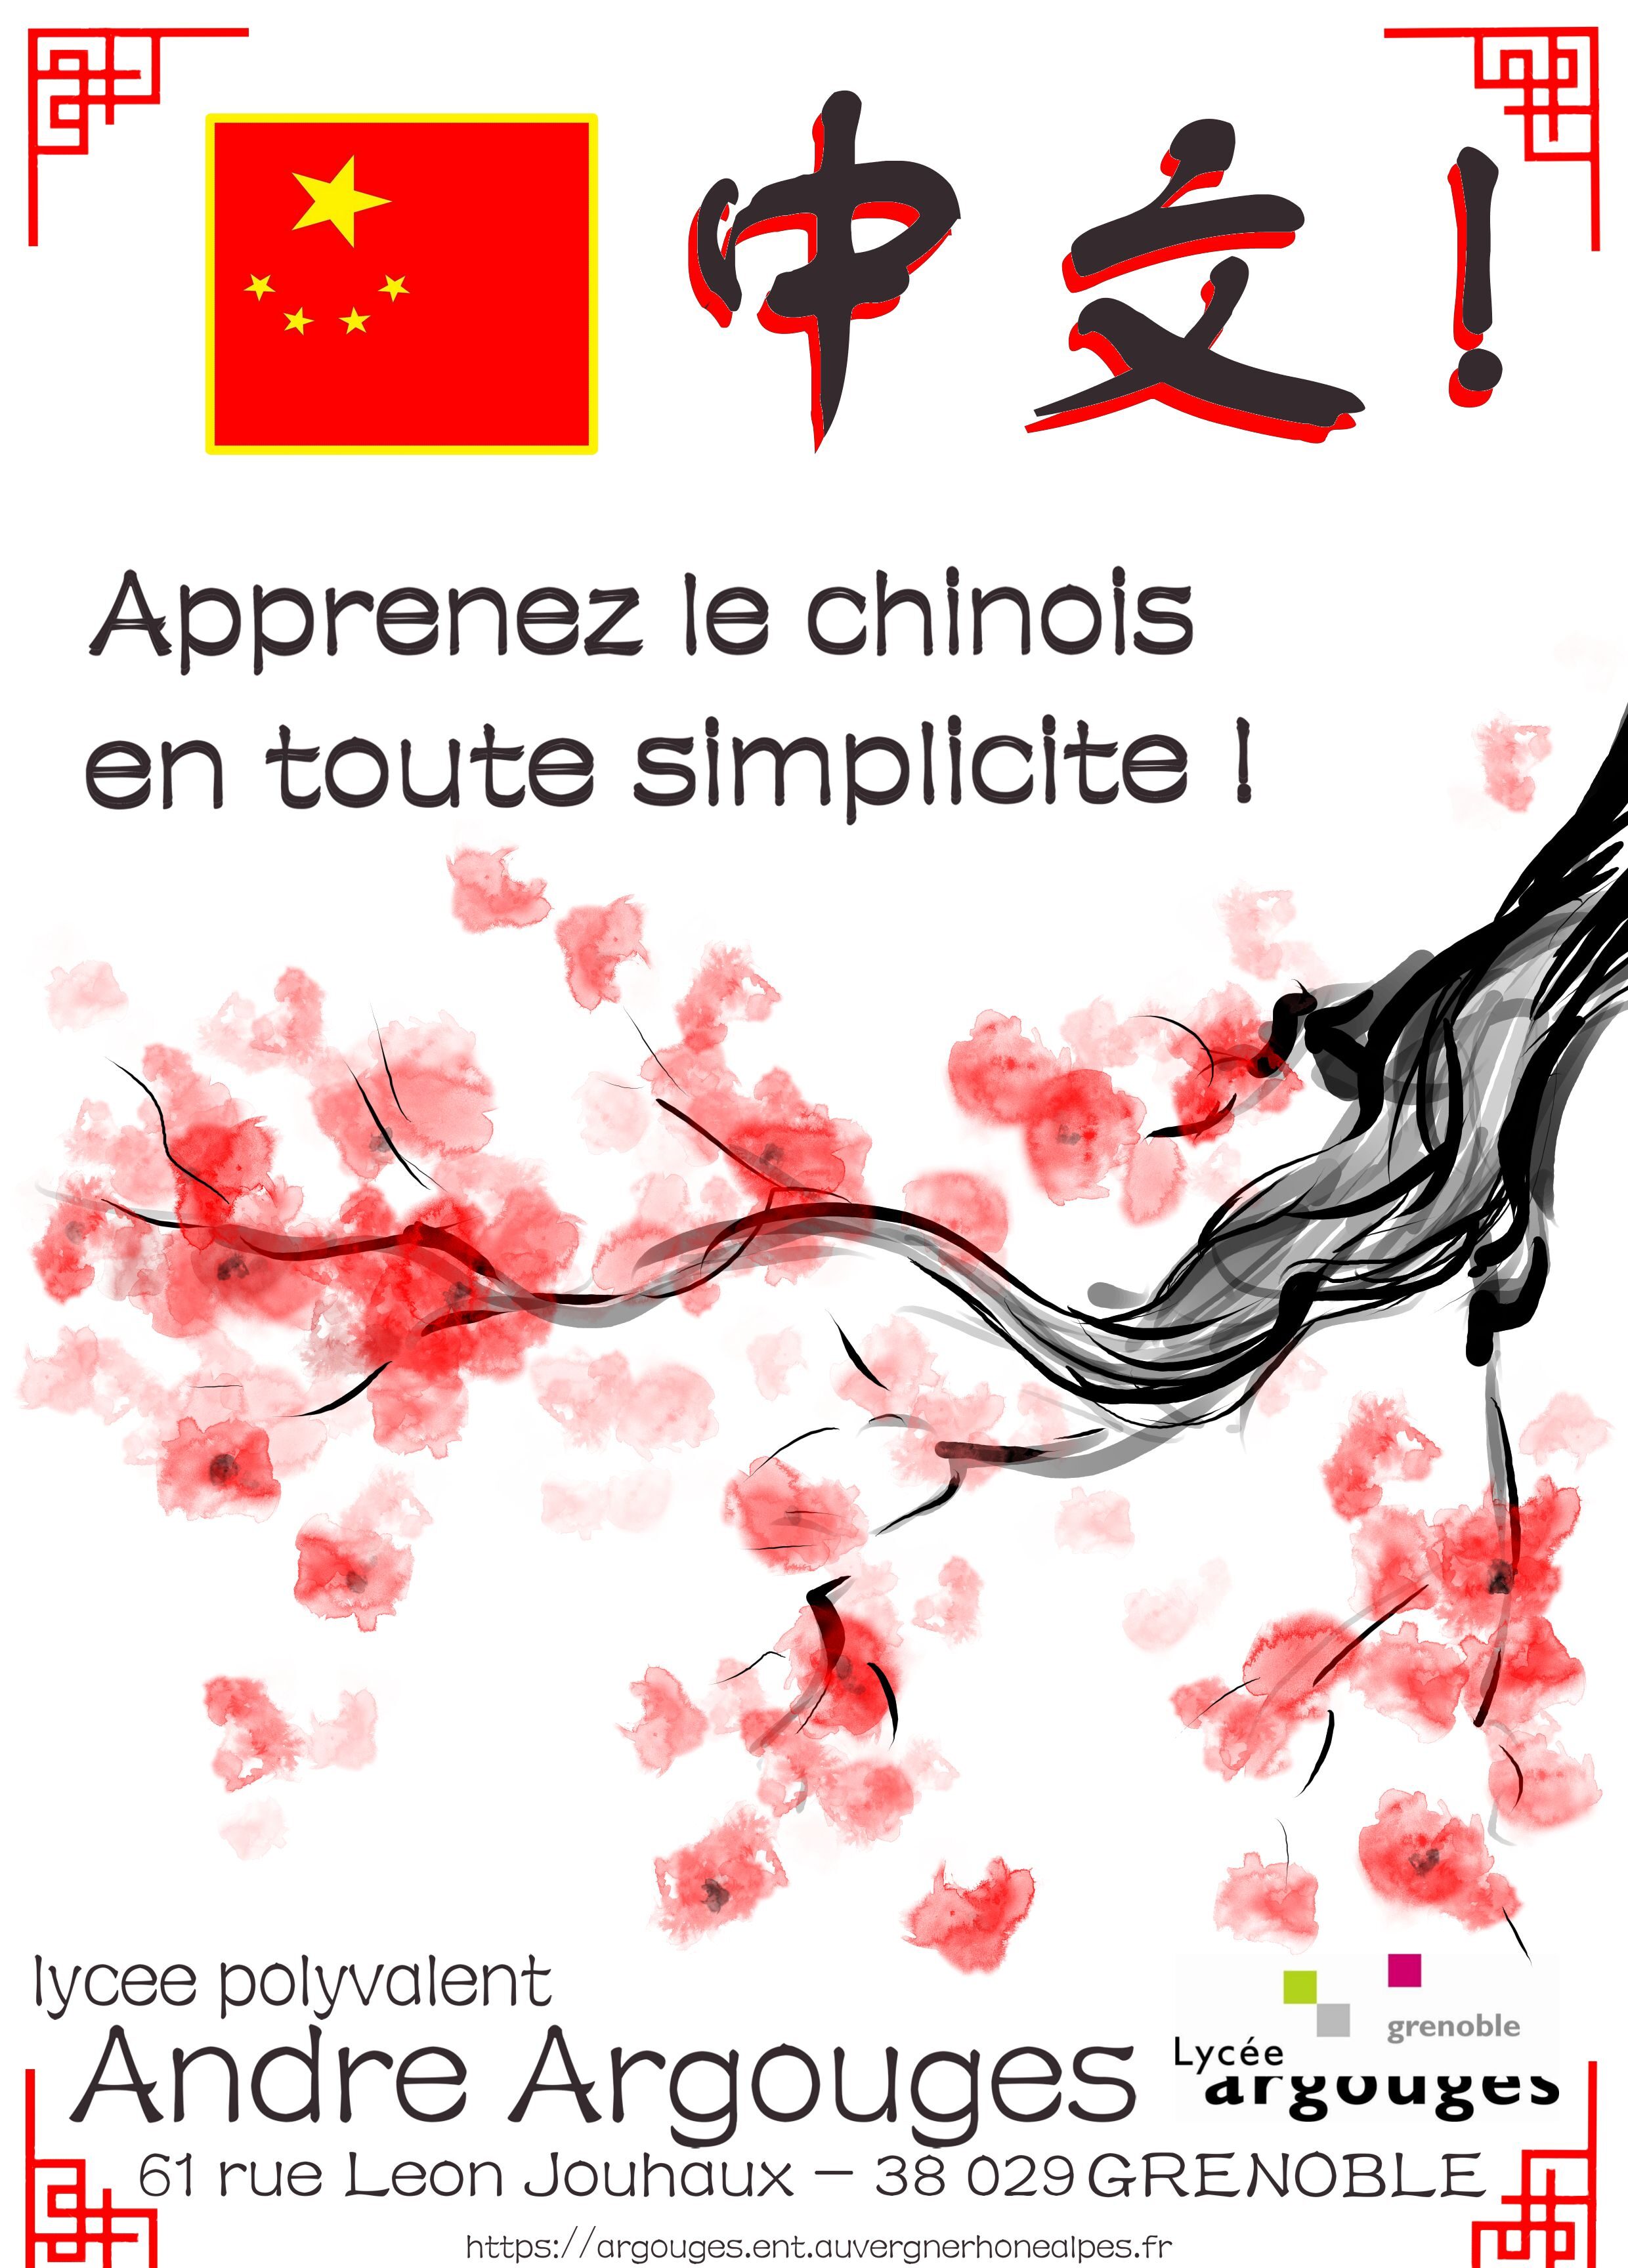 affiche promotion chinois 2.jpg